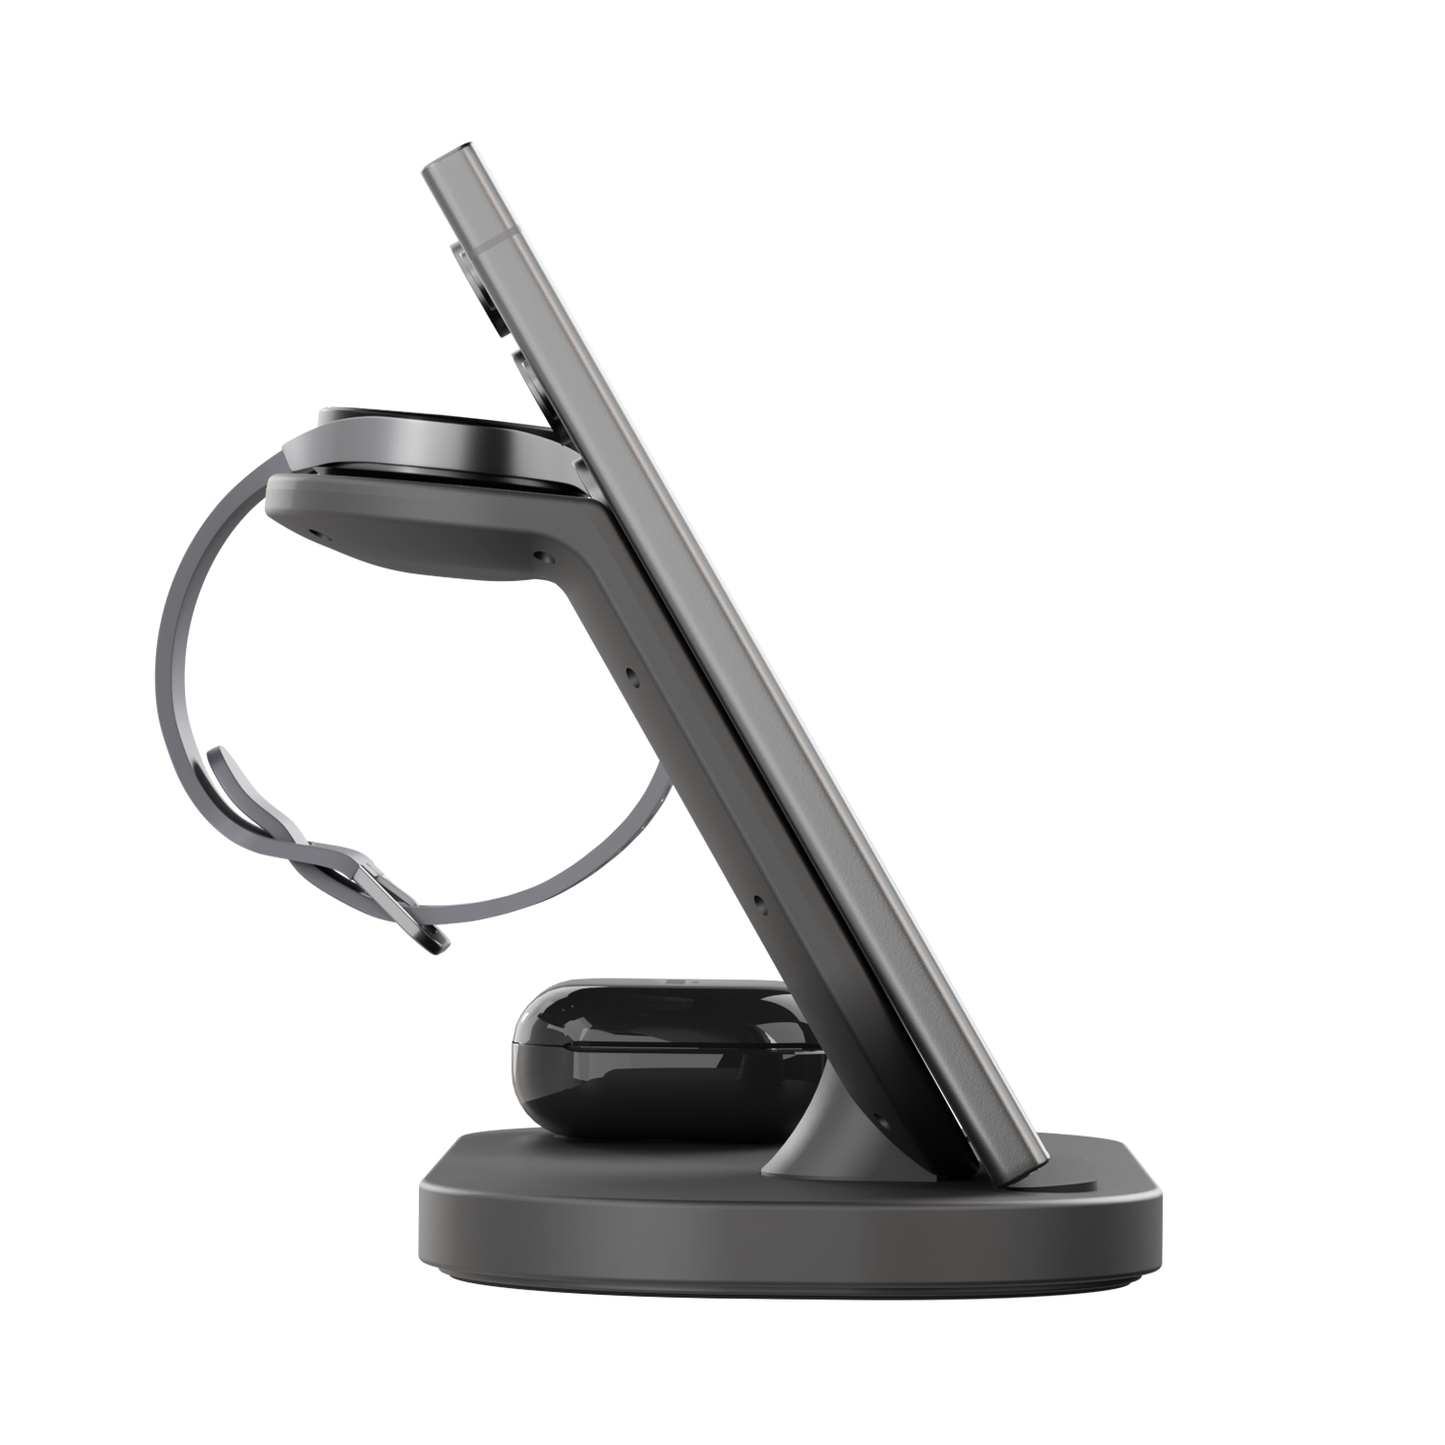 Side view of iCharger Samsung Pro 3-in-1 charging station with a sleek smartphone, smartwatch, and wireless earbuds, showcasing convenient charging technology.